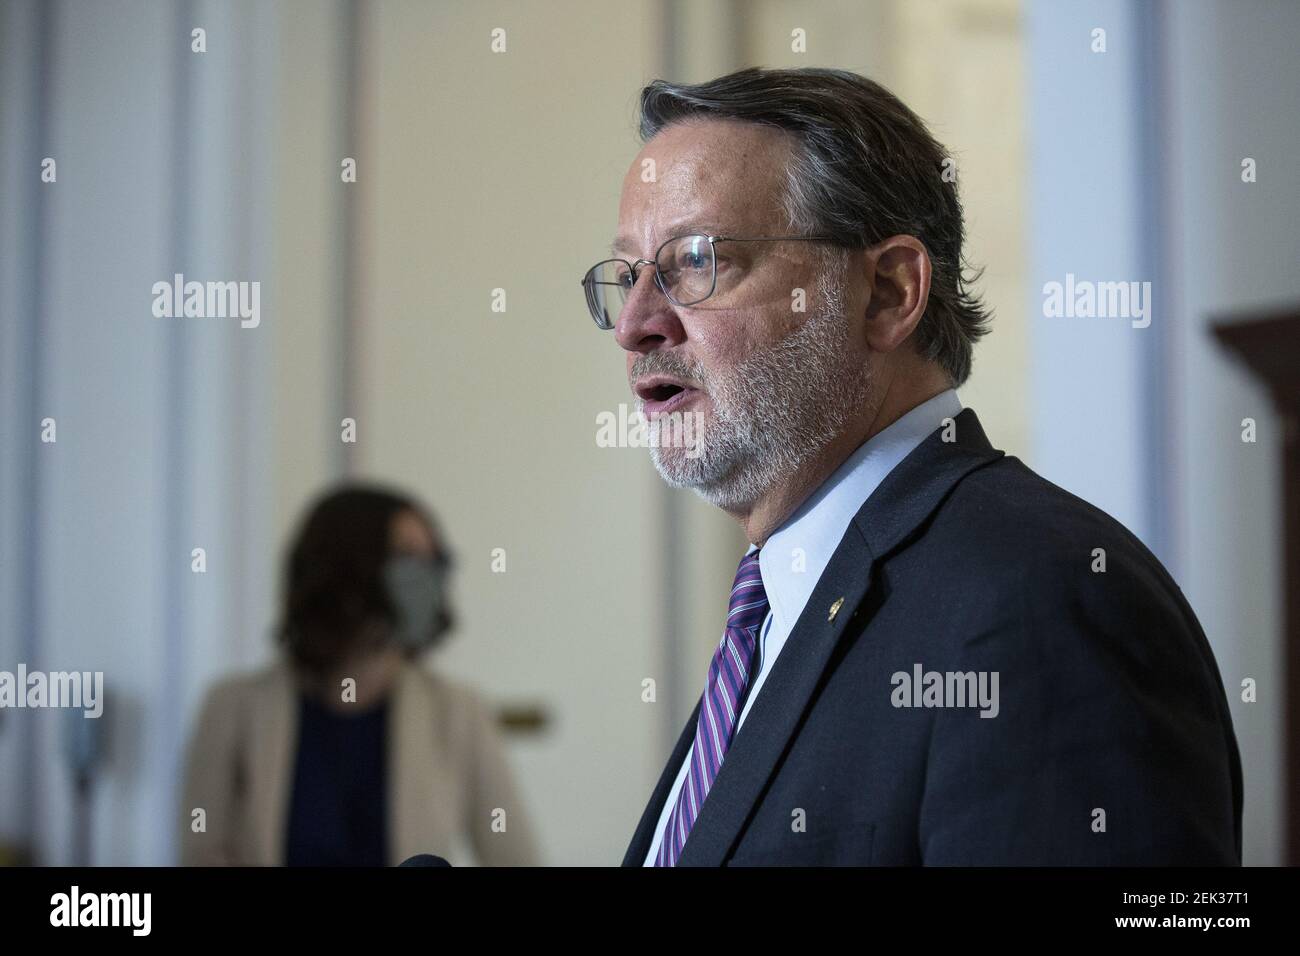 United States Senator Gary Peters (Democrat of Michigan) speaks to members of the media following a U.S. Senate Committee on Homeland Security and Governmental Affairs meeting in the Senate Russell Office Building in Washington D.C., U.S., on Wednesday, May 20, 2020, to consider a motion to issue a subpoena to Blue Star Strategies. Credit: Stefani Reynolds / CNP/Sipa USA Stock Photo